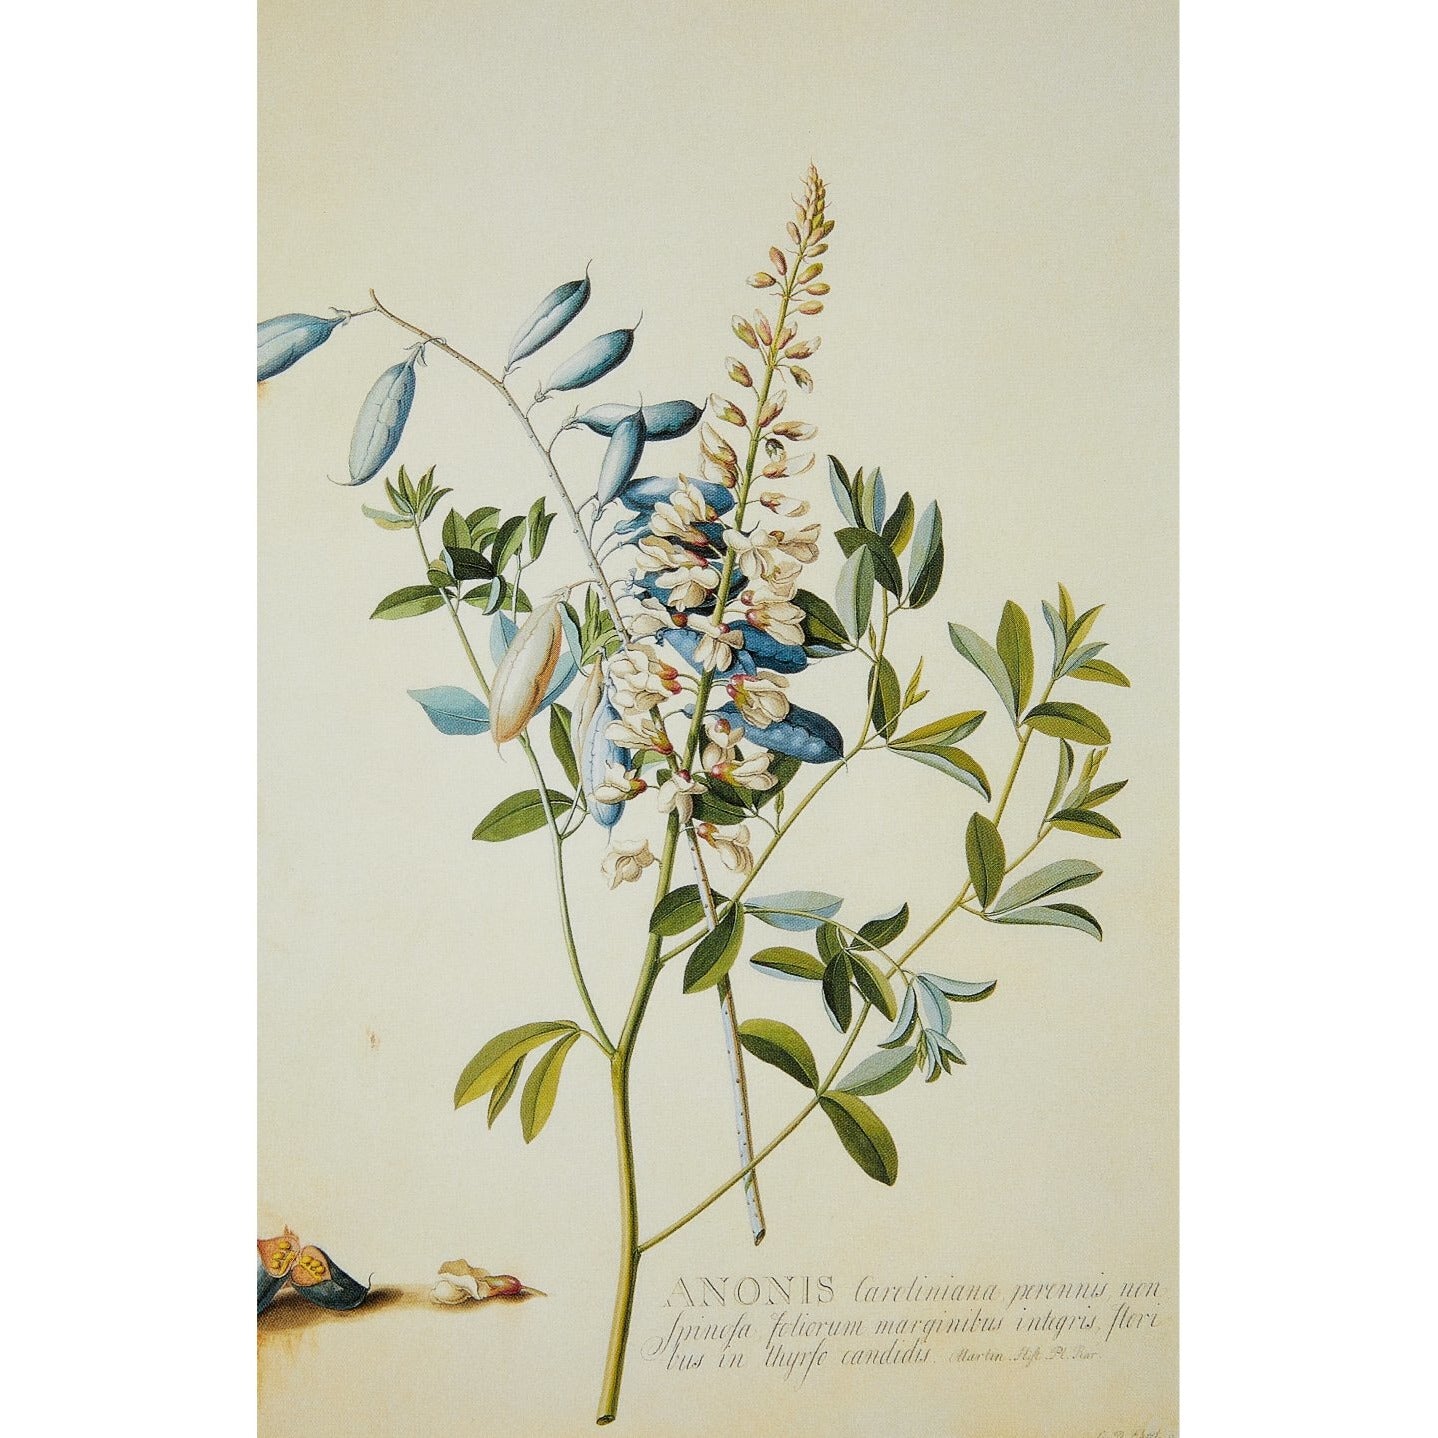 Notecard - Anonis or Rest Harrow (Crotalaria) by Georg Dionysius Ehret. From the Broughton collection of the Fitzwilliam Museum, brought to you by CuratingCambridge.co.uk